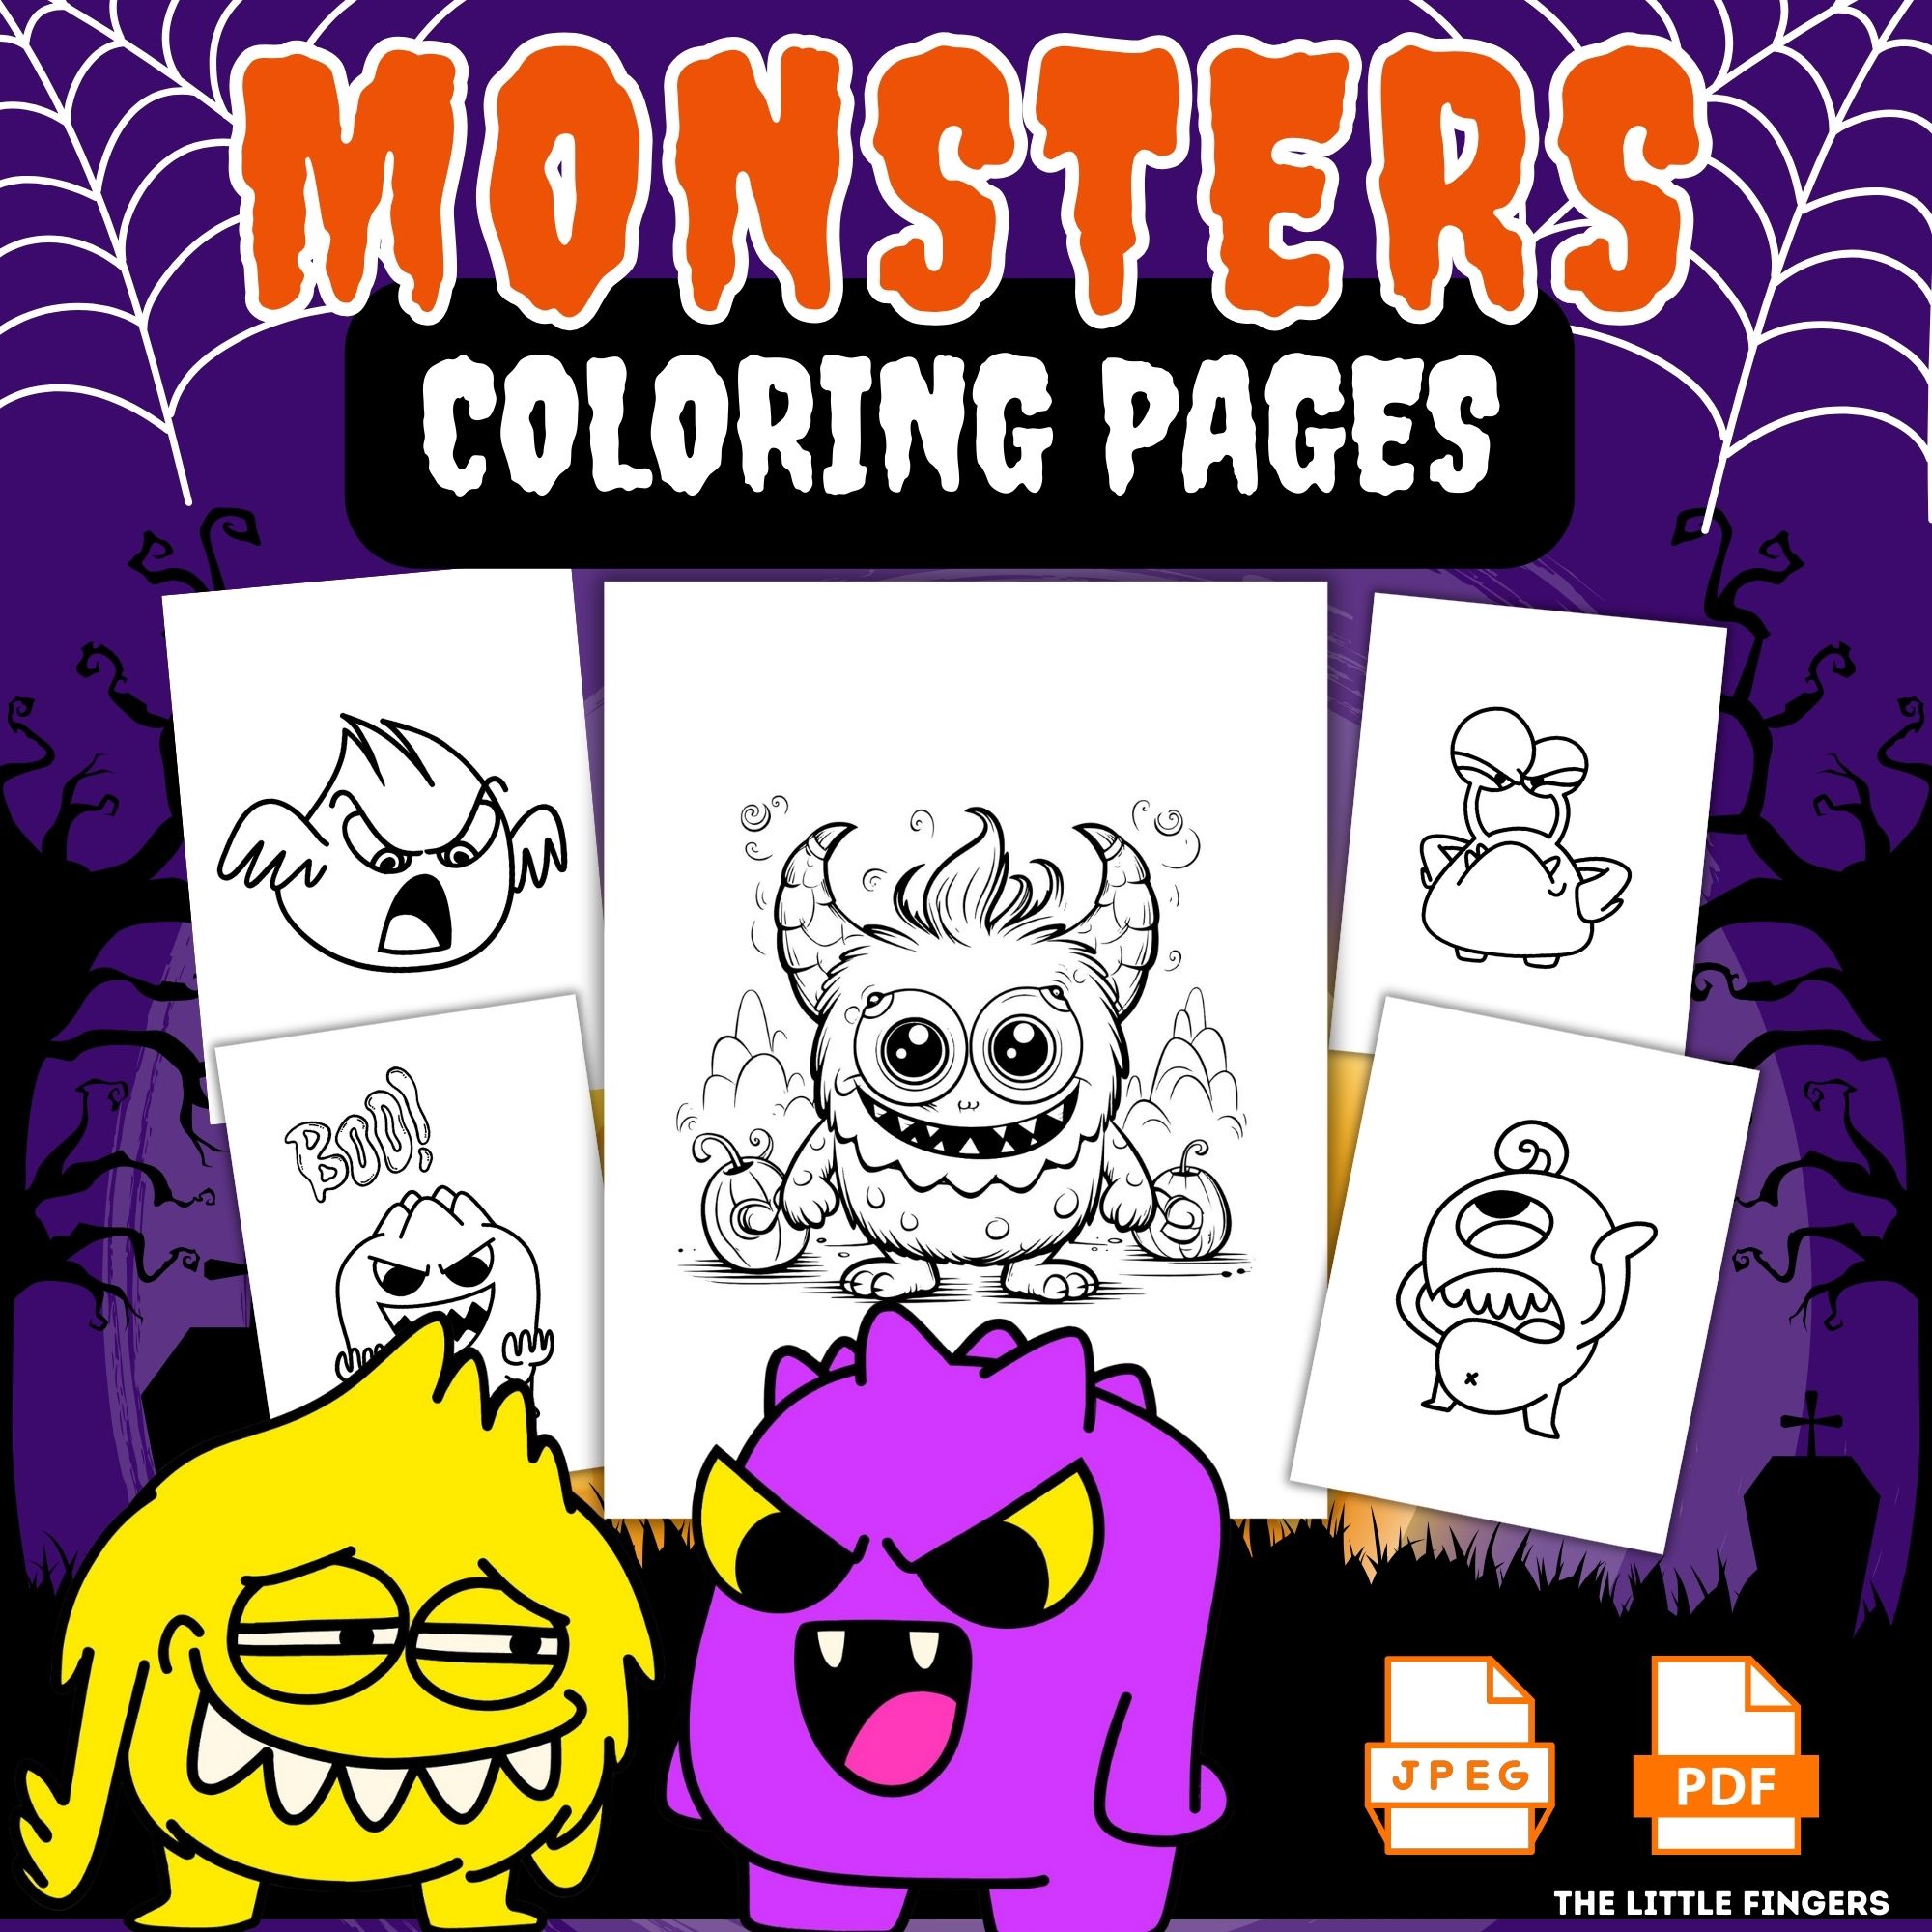 Monsters coloring pages halloween art activity made by teachers